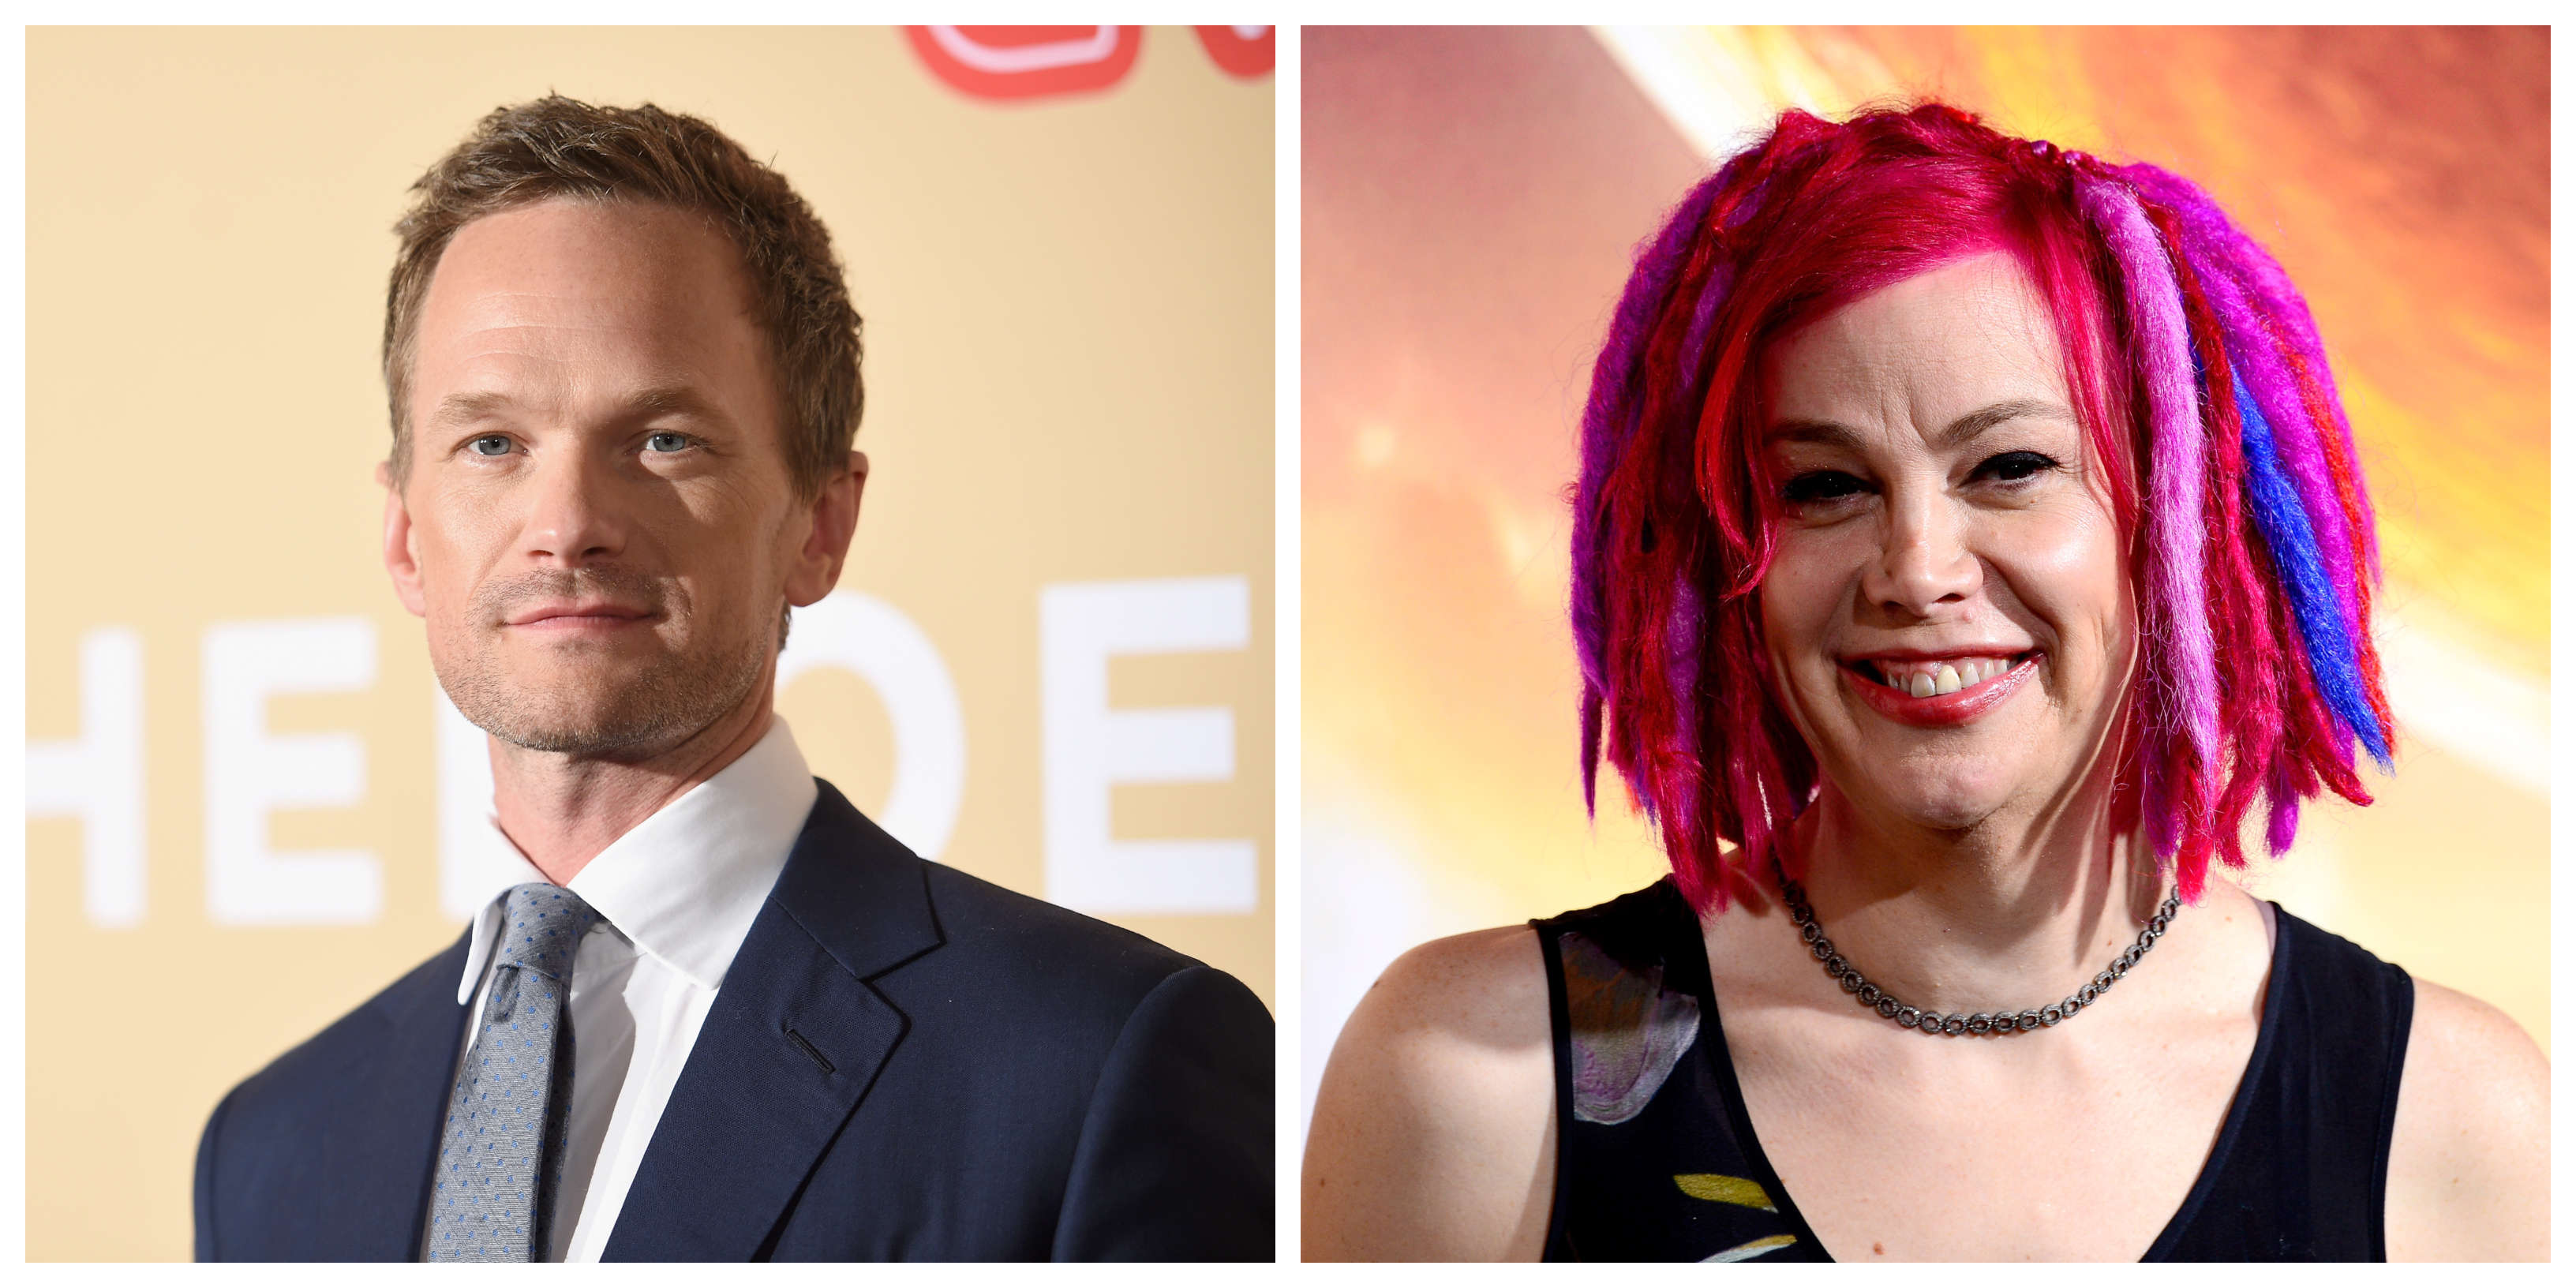 Neil Patrick Harris on Lana Wachowski's vision for The Matrix 4: 'Her style has shifted'